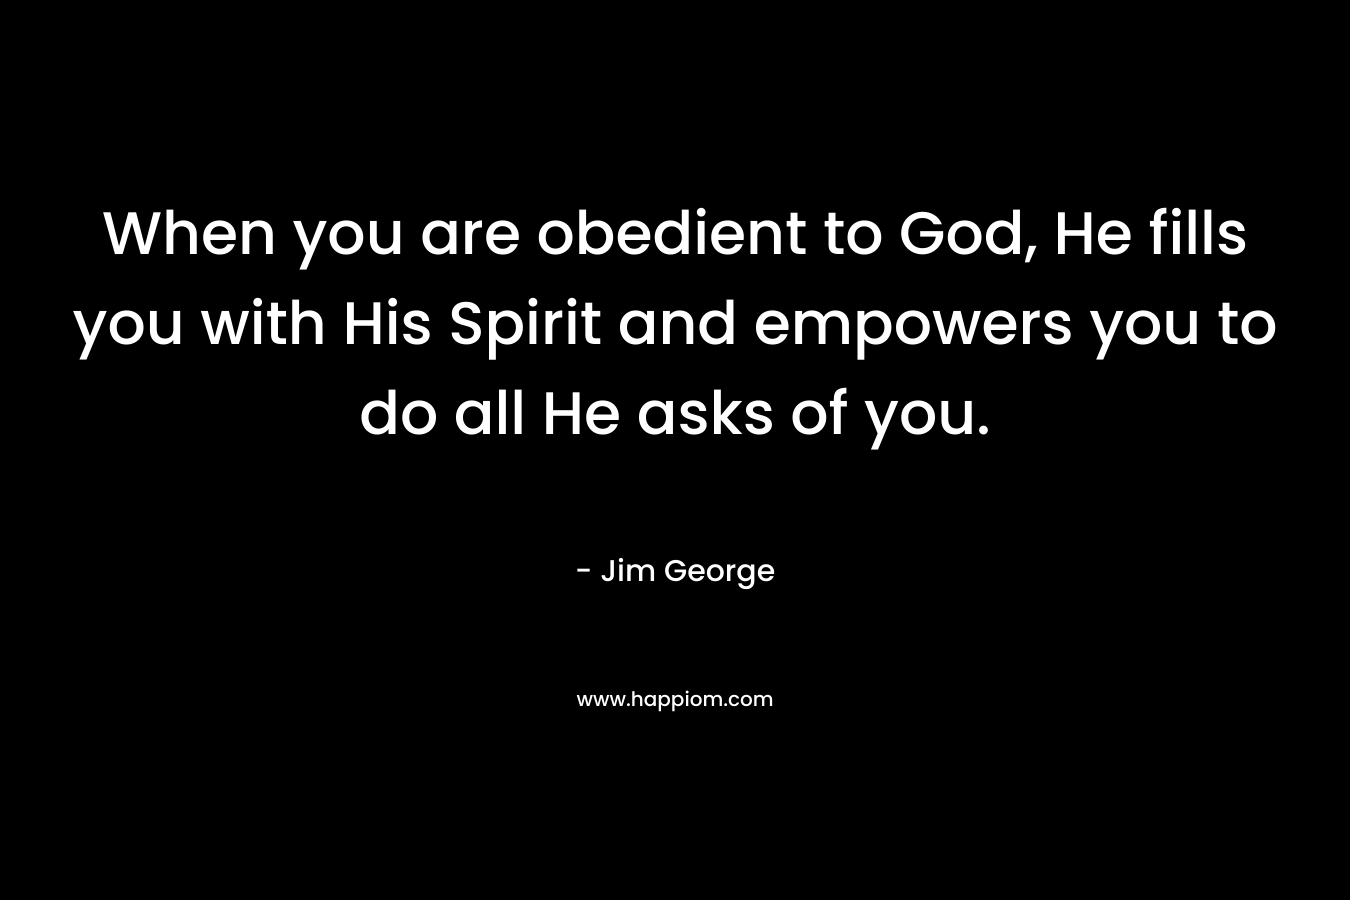 When you are obedient to God, He fills you with His Spirit and empowers you to do all He asks of you. – Jim George